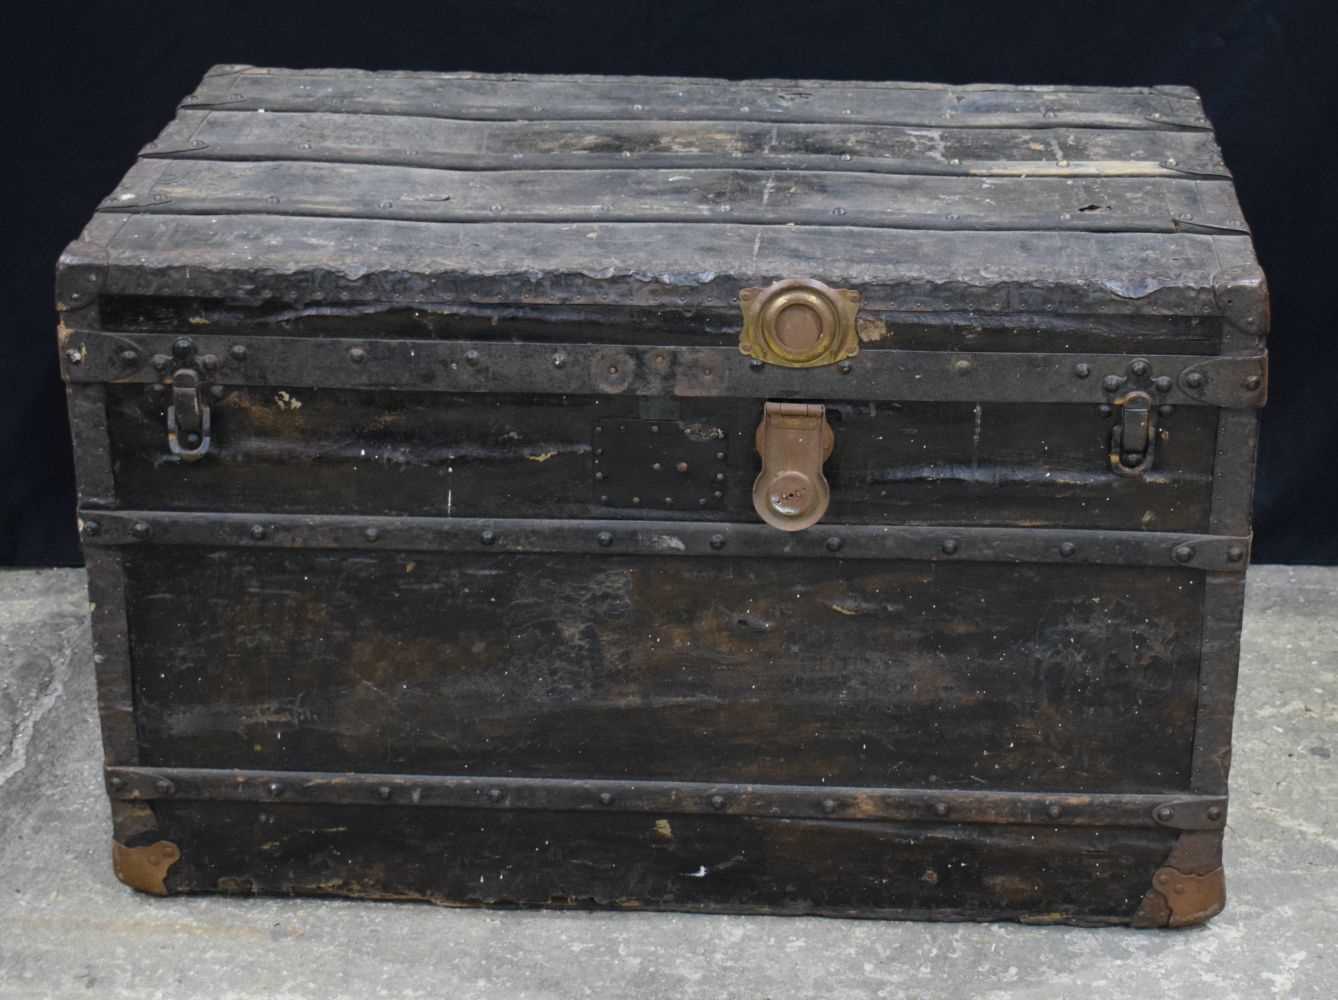 A 19th Century Louis Vuitton metal bound leather covered wooden trunk 57 x 90 x 53 cm - Image 2 of 10